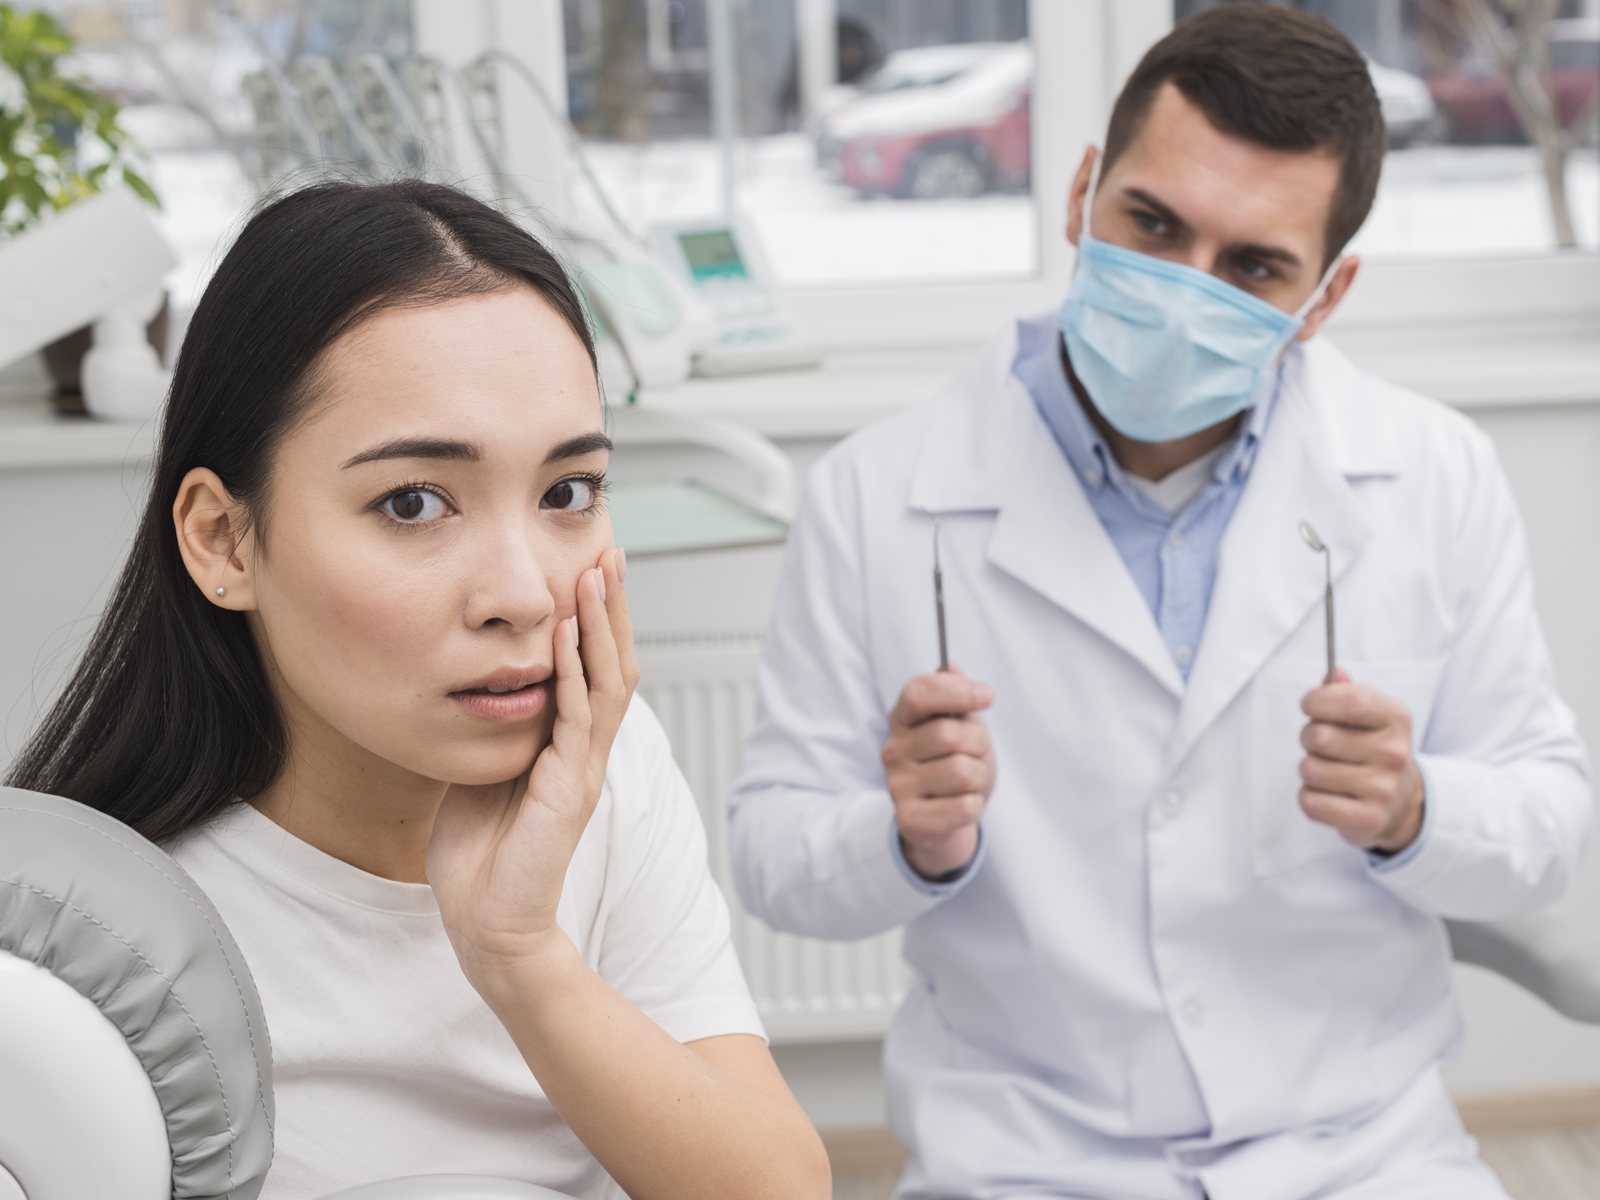 Do You Still Need A Root Canal If Your Tooth Pain Stops?